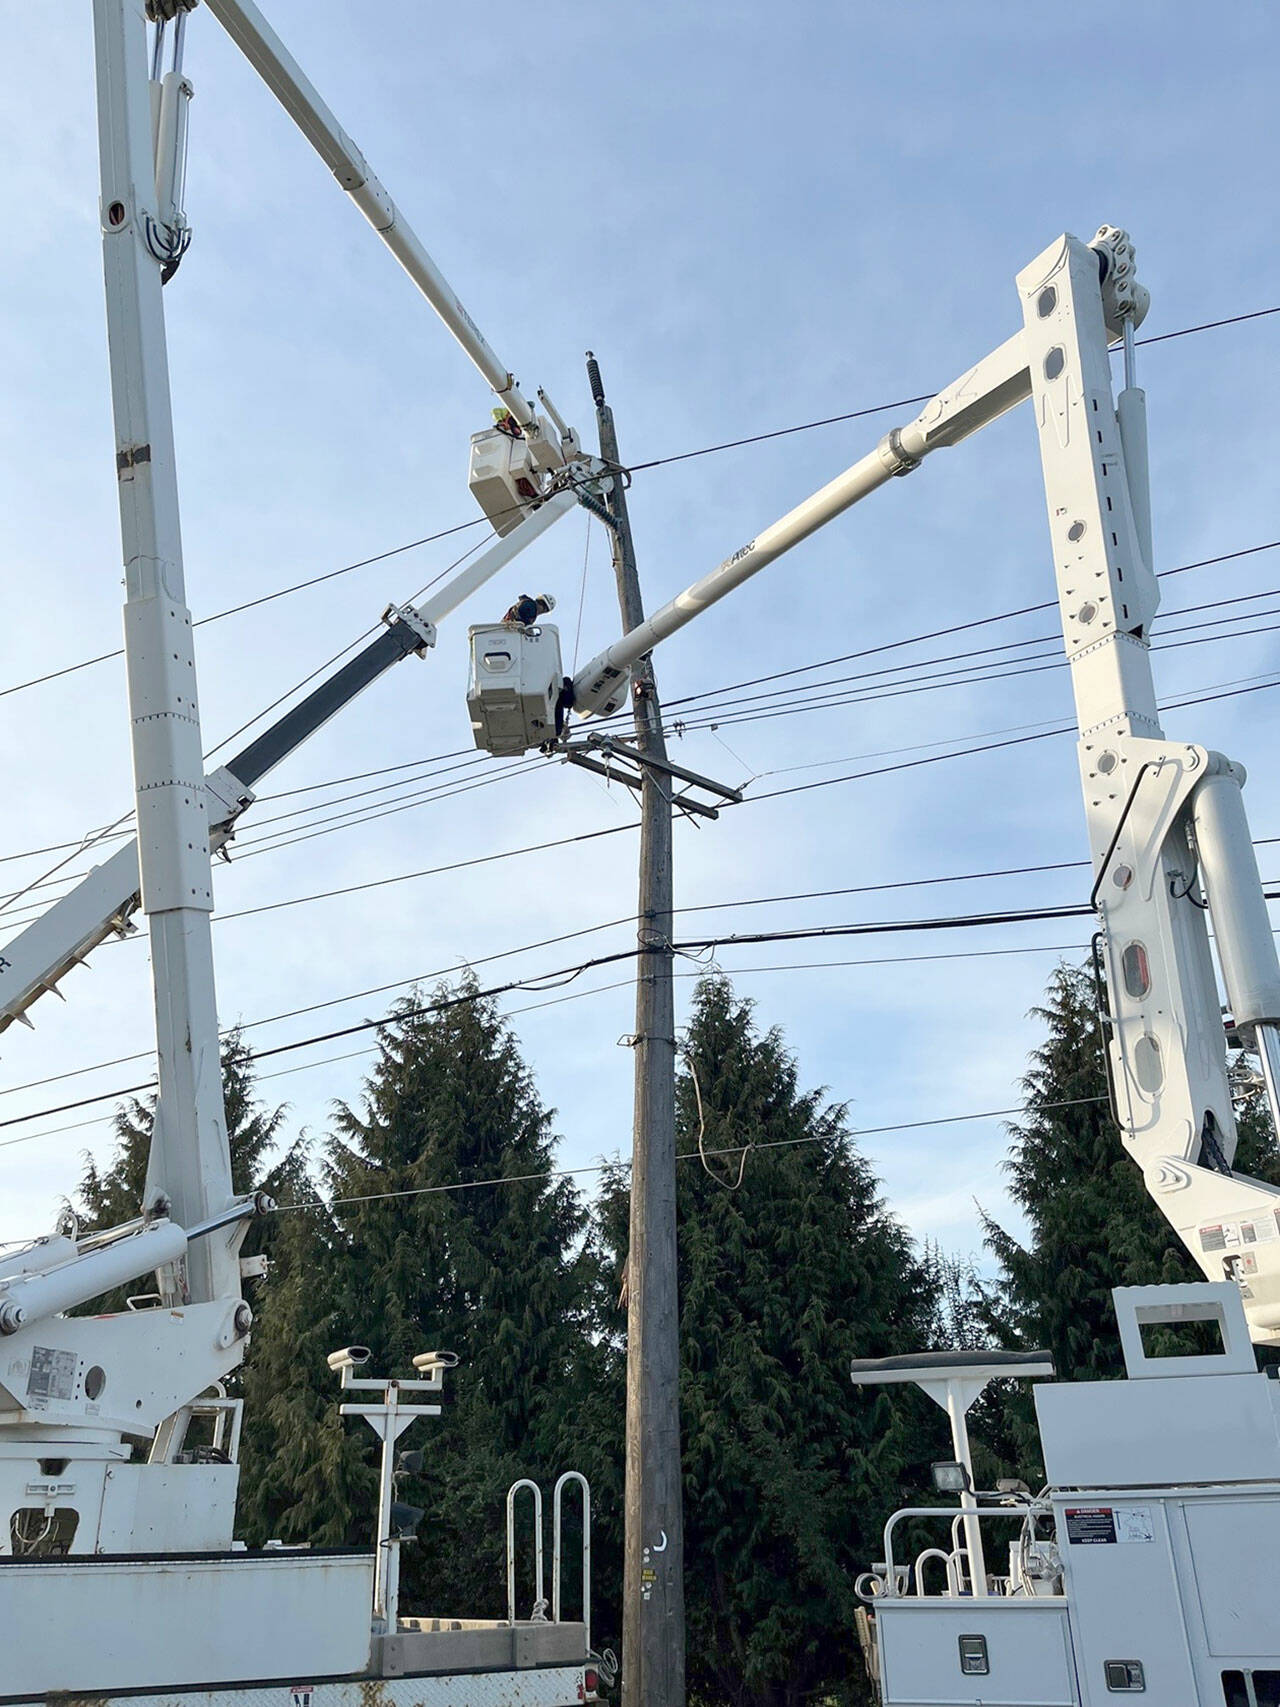 Photo courtesy of Clallam County PUD / Crews from Clallam County Public Utility District work to restore power last week. About 1,300 Clallam County PUD customers lost power at 2:30 a.m. on March 30 after a car hit a pole at Elizabeth Lane and Old Olympic Highway.